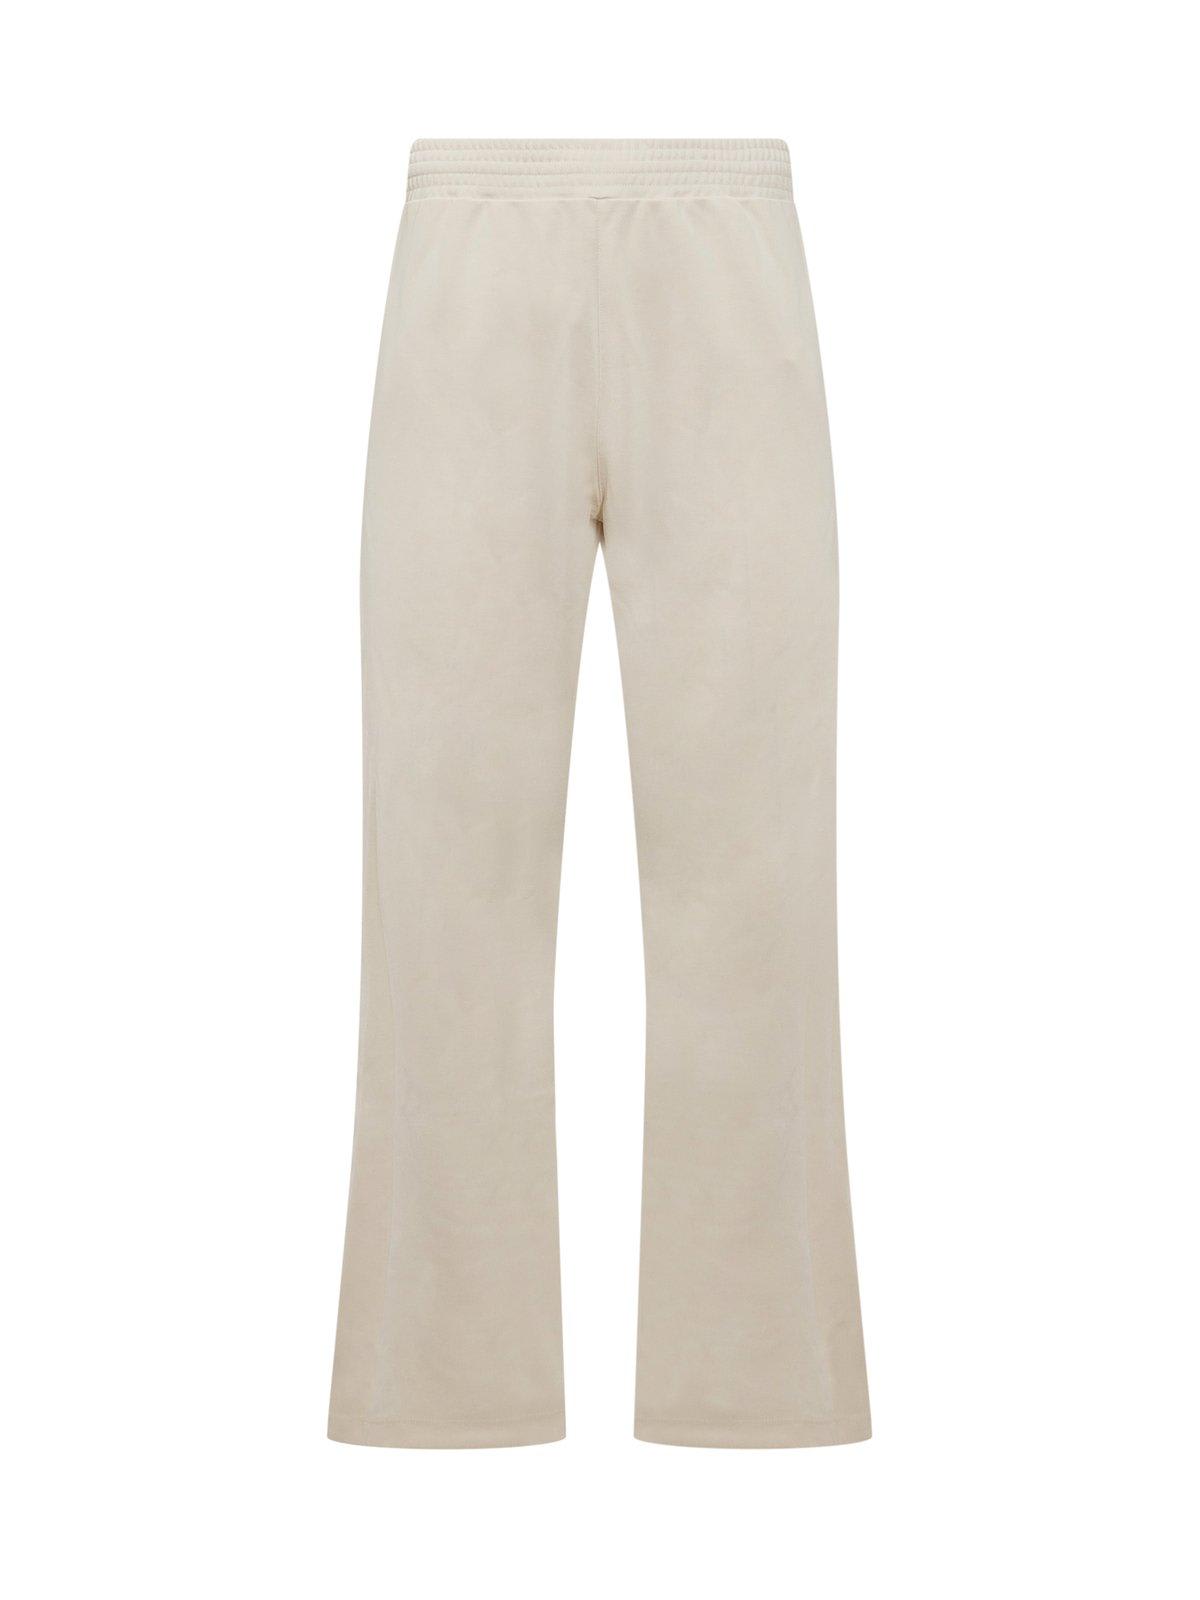 J.W. Anderson Stud Detailed Elasticated Waistband Trousers